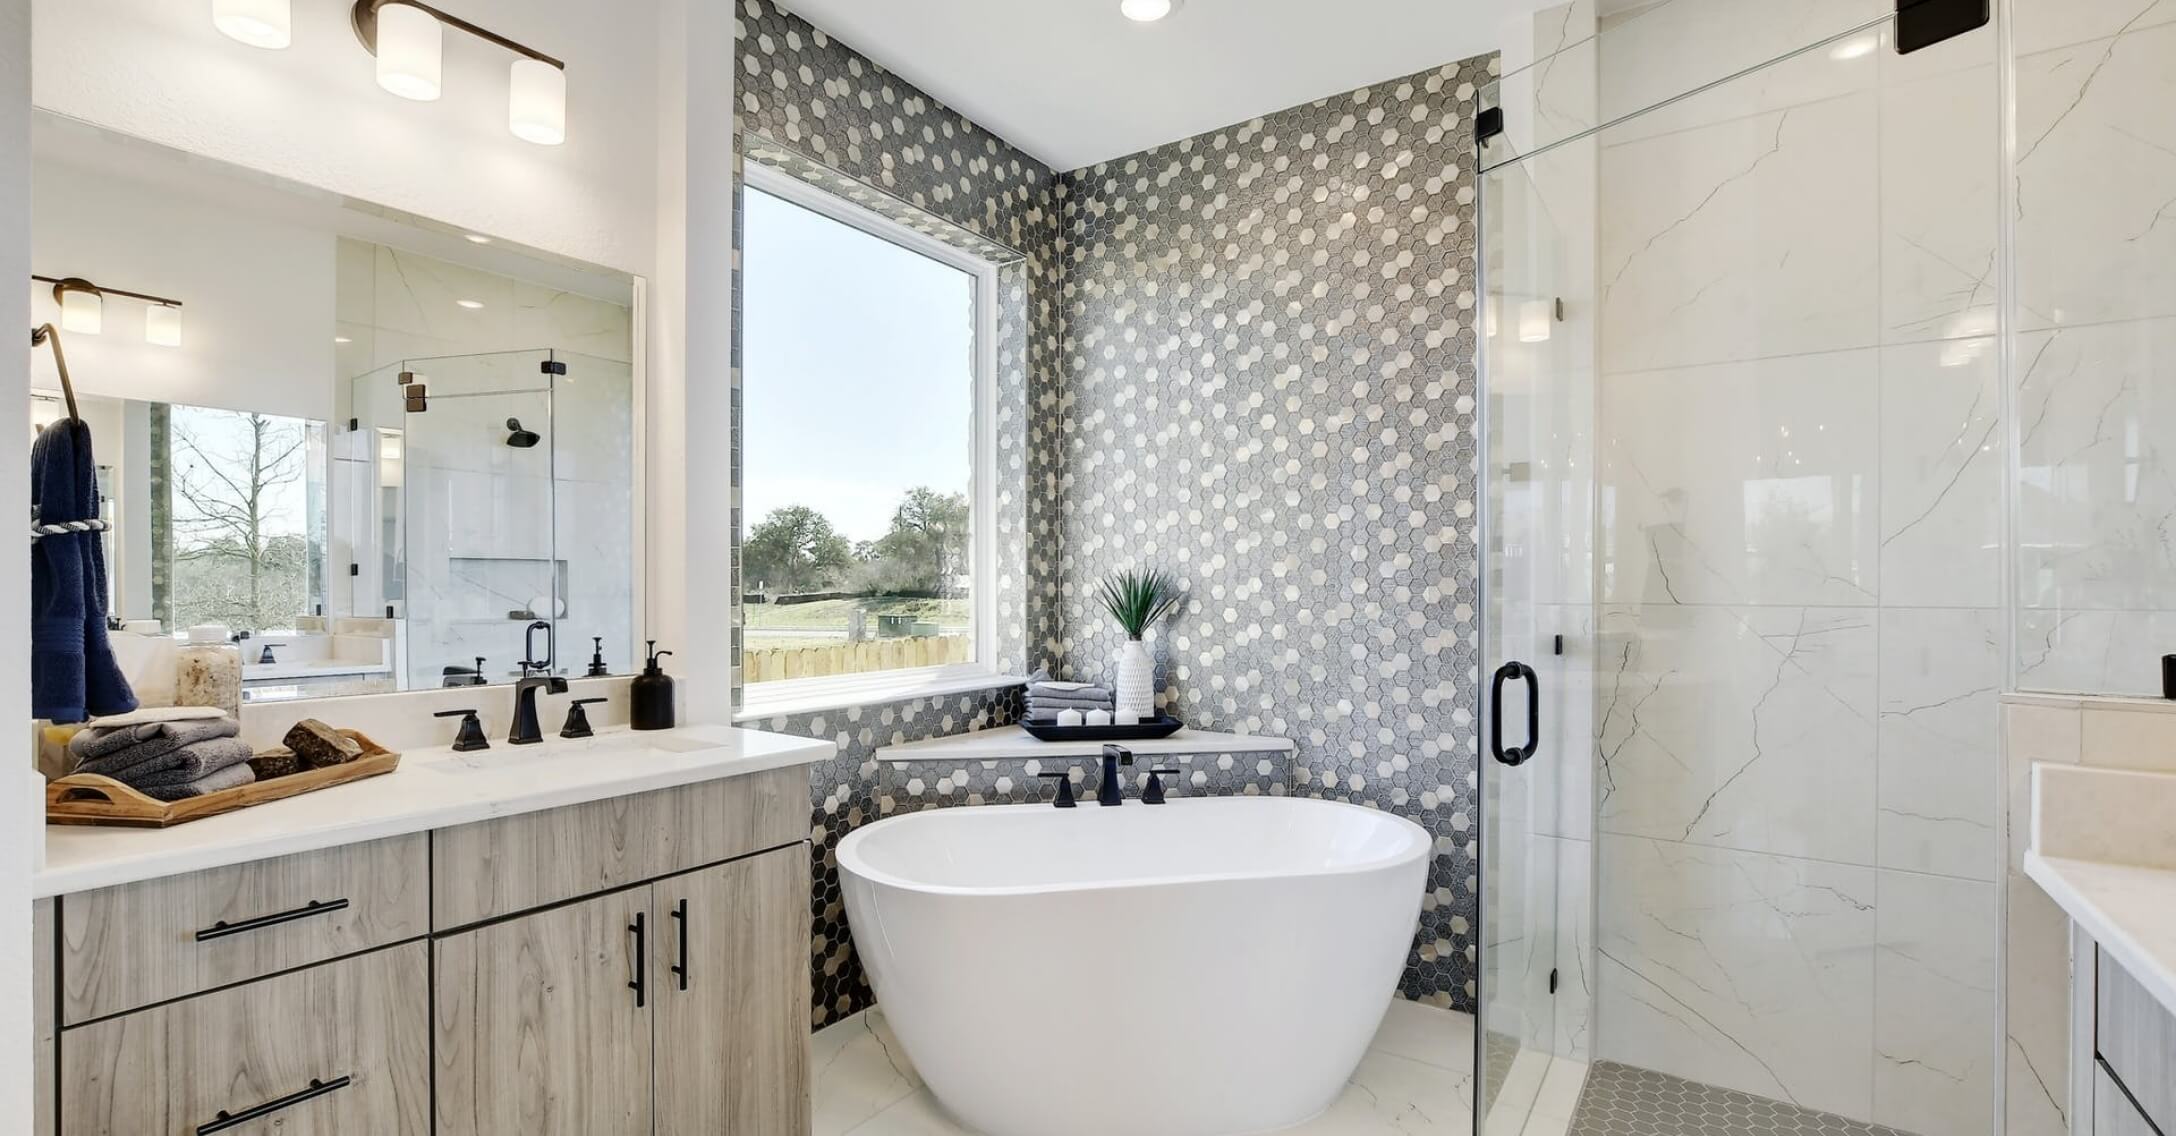 A contemporary bathroom with a spacious tub and walk-in shower in new homes offered by Mayfair Homes in New Braunfels, Texas.